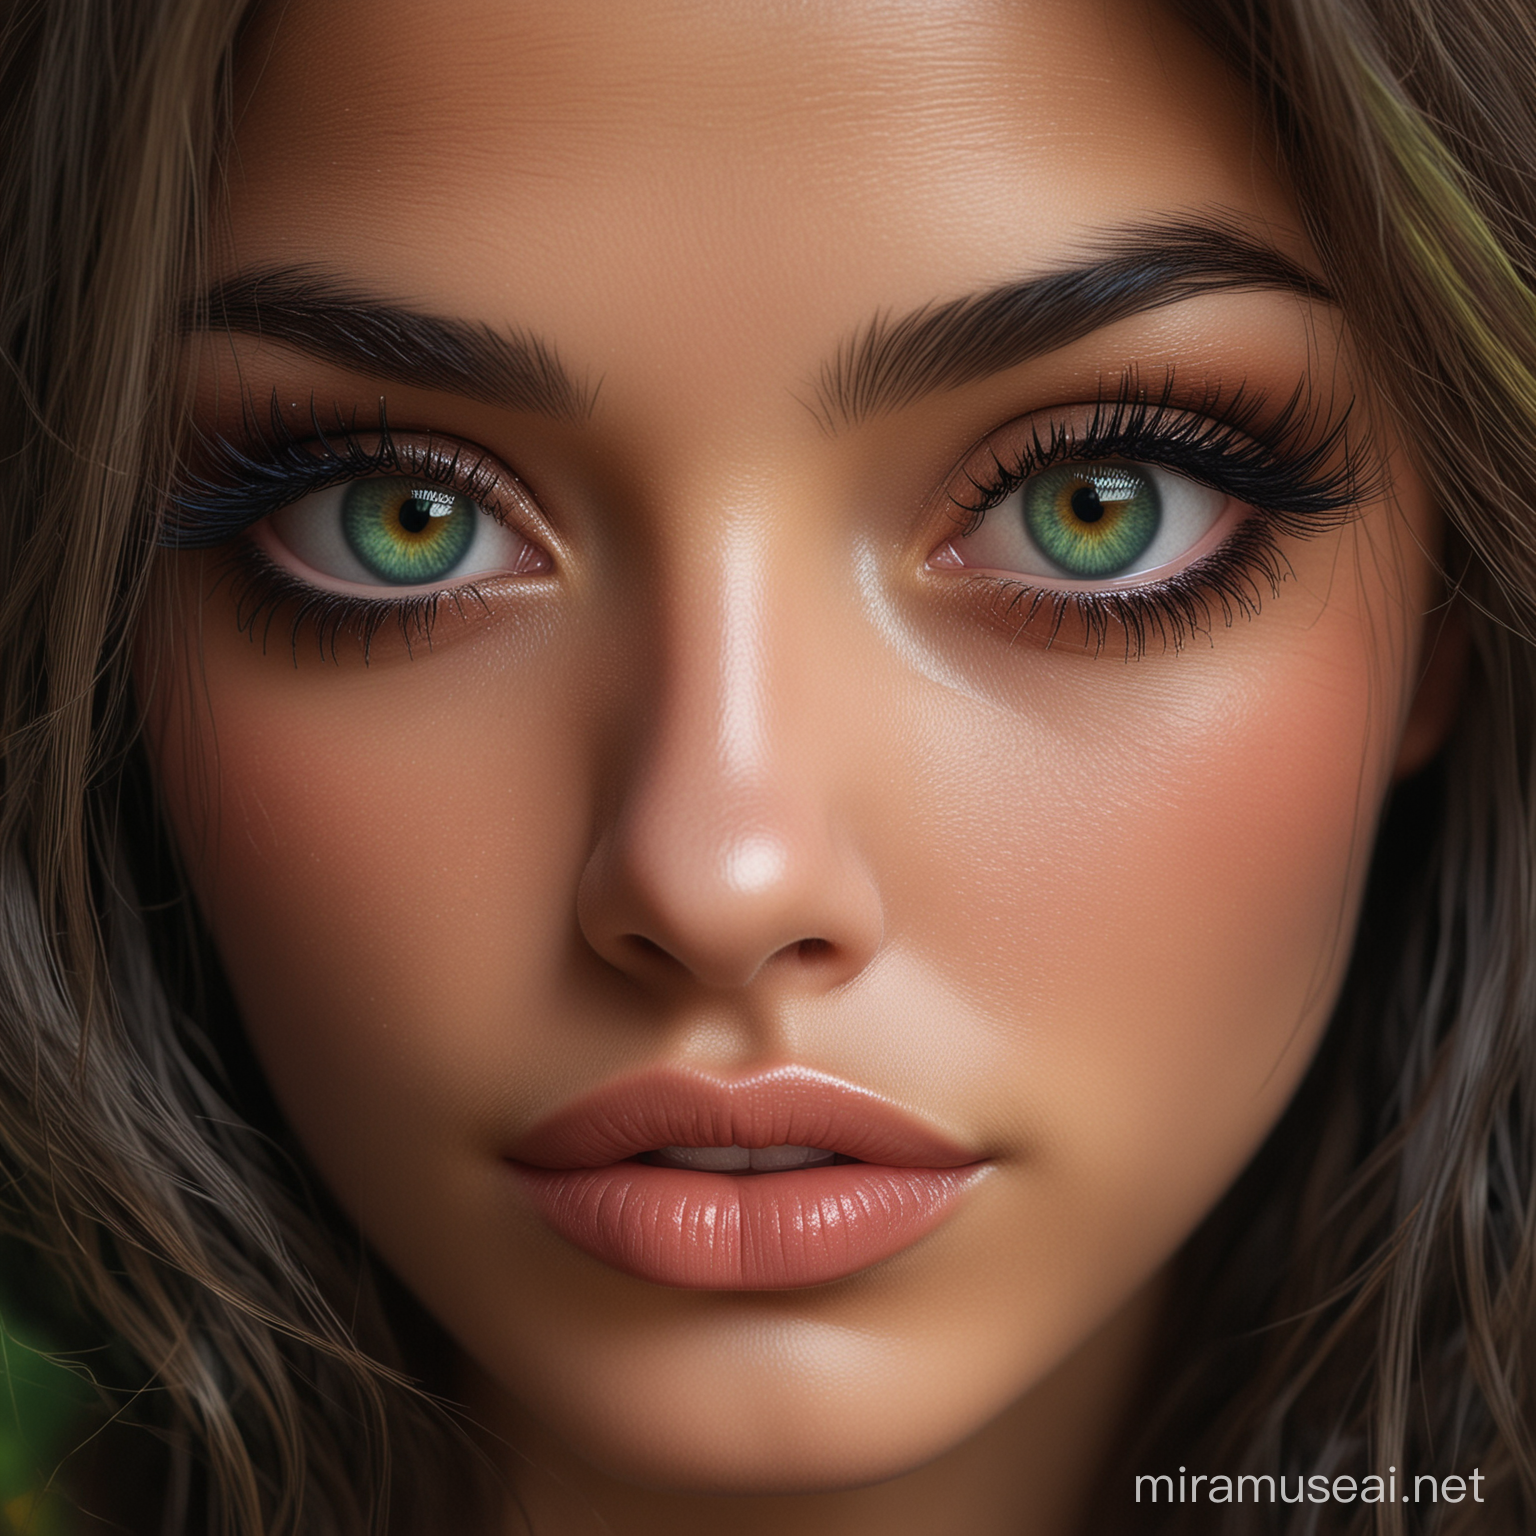 Ethereal Serenity Mesmerizing Portrait of a Woman with Detailed Features